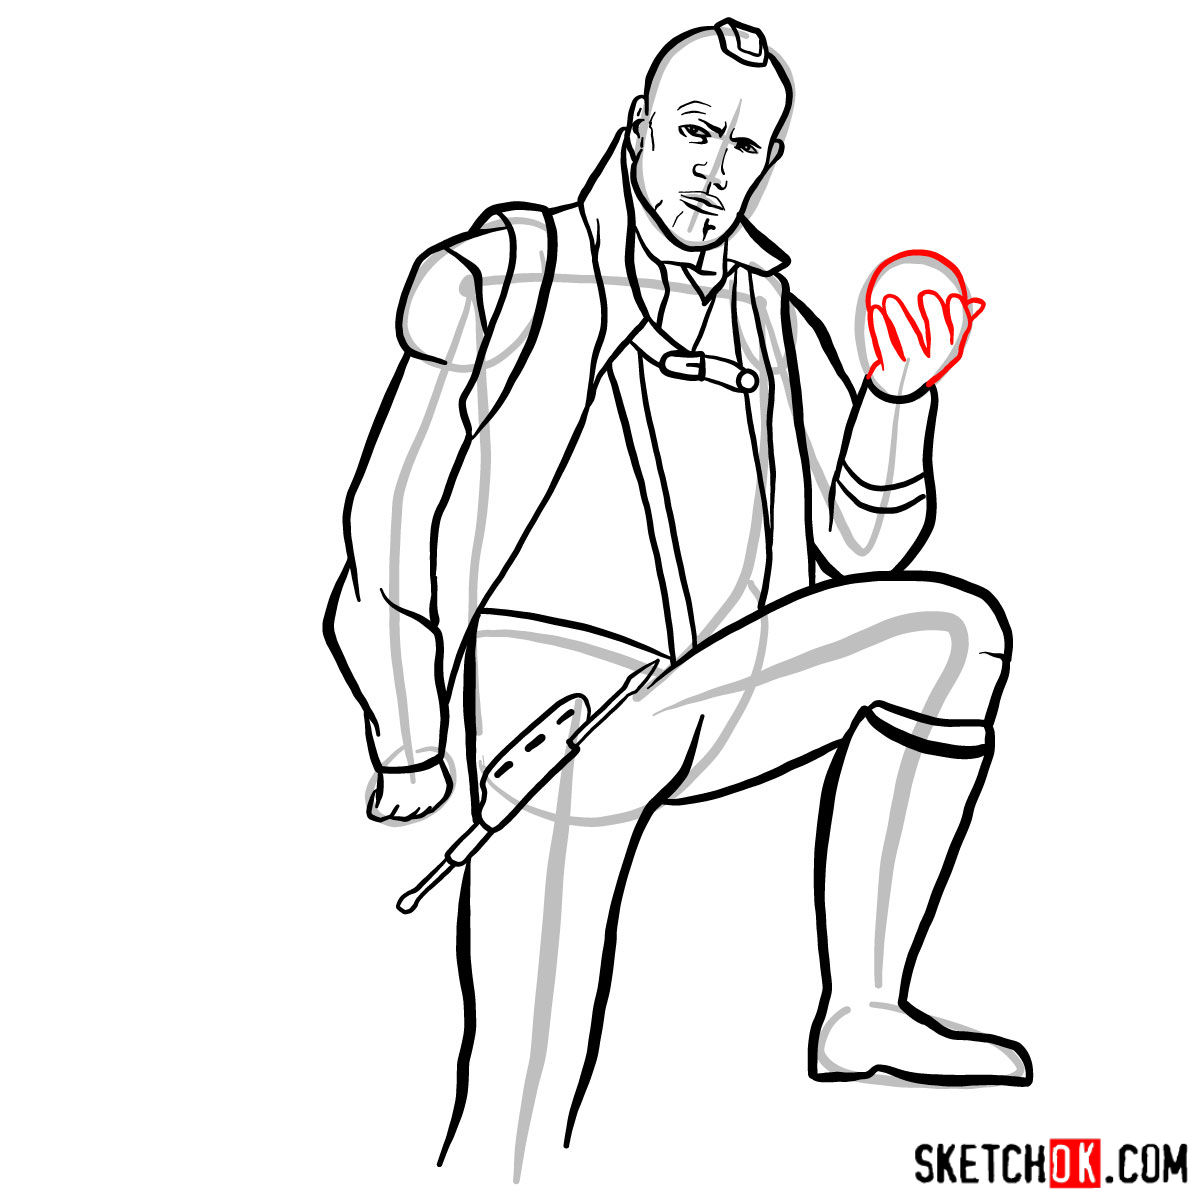 How to draw Yondu Udonta from Guardians of the Galaxy - step 12